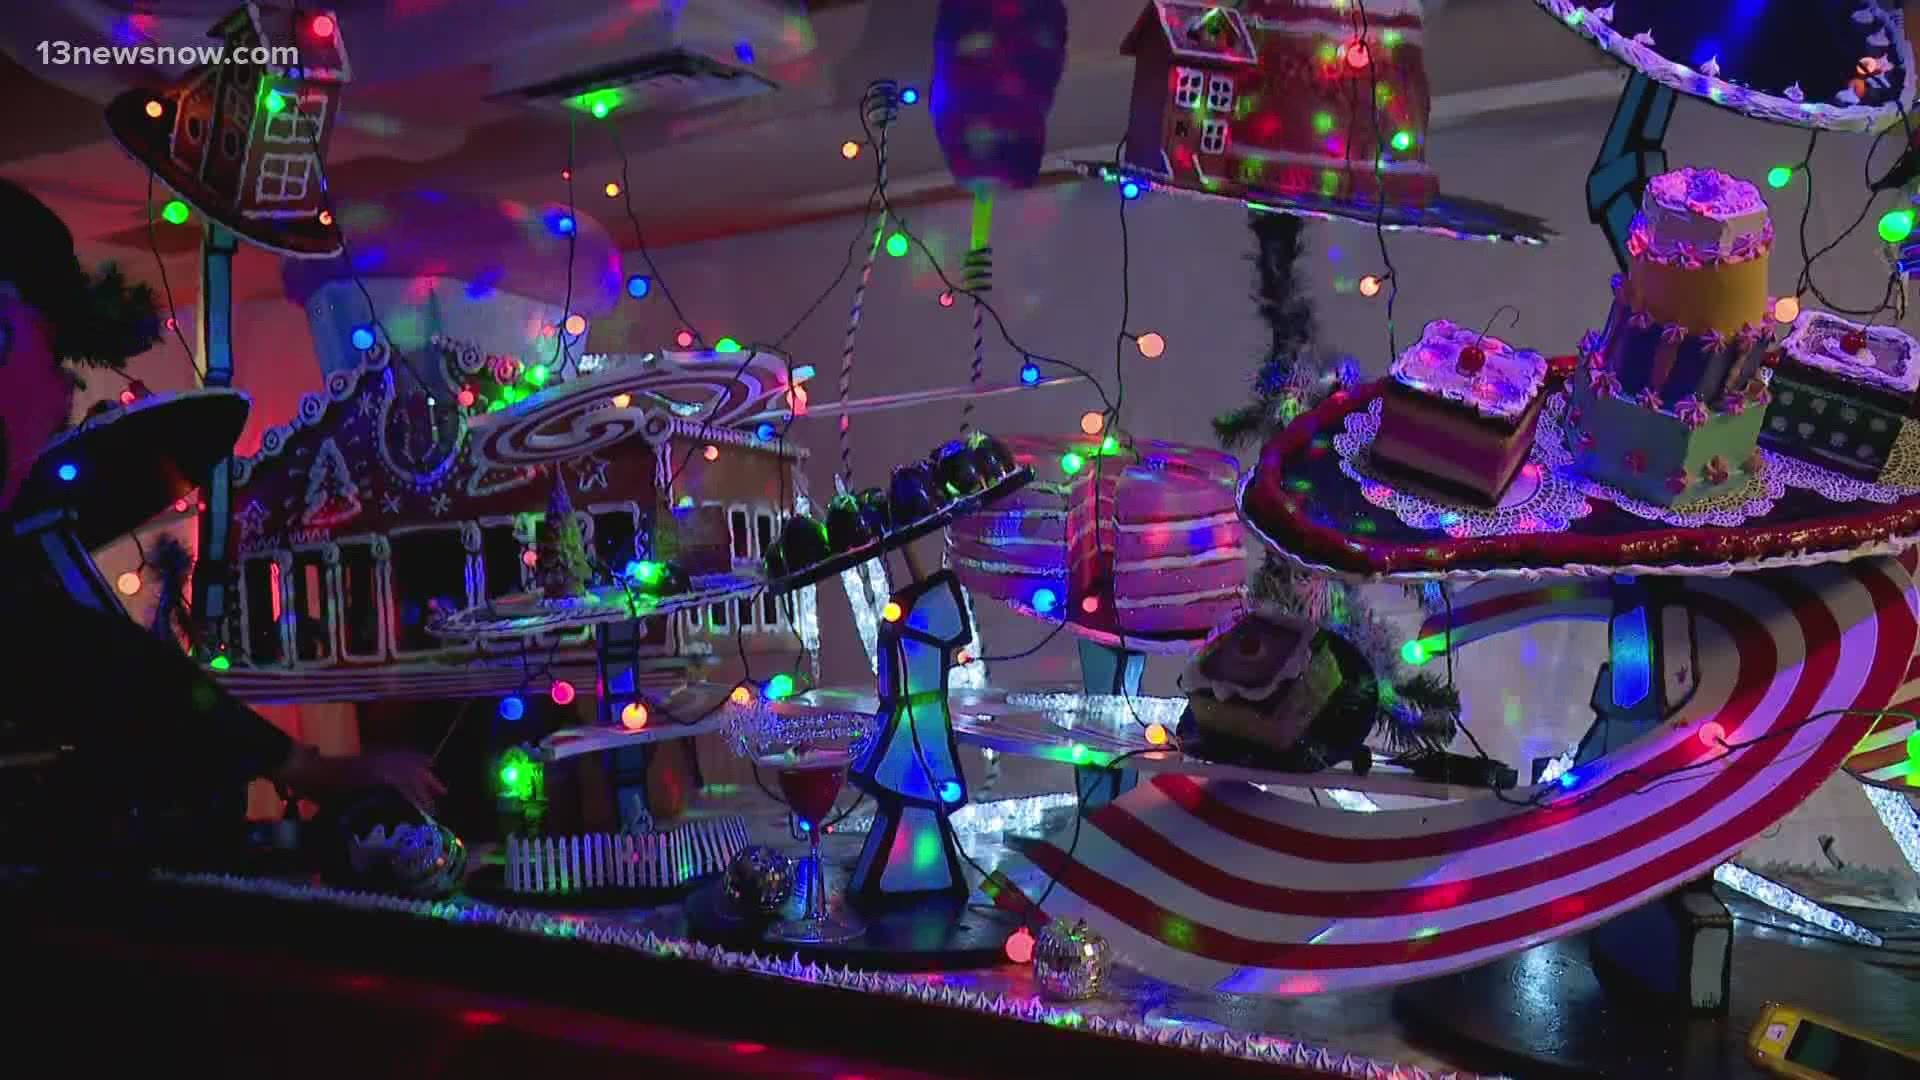 Nauticus is transforming the historic battleship into a full-on holiday experience. That includes turning its cannons into candy canes and adding 250,000 lights.